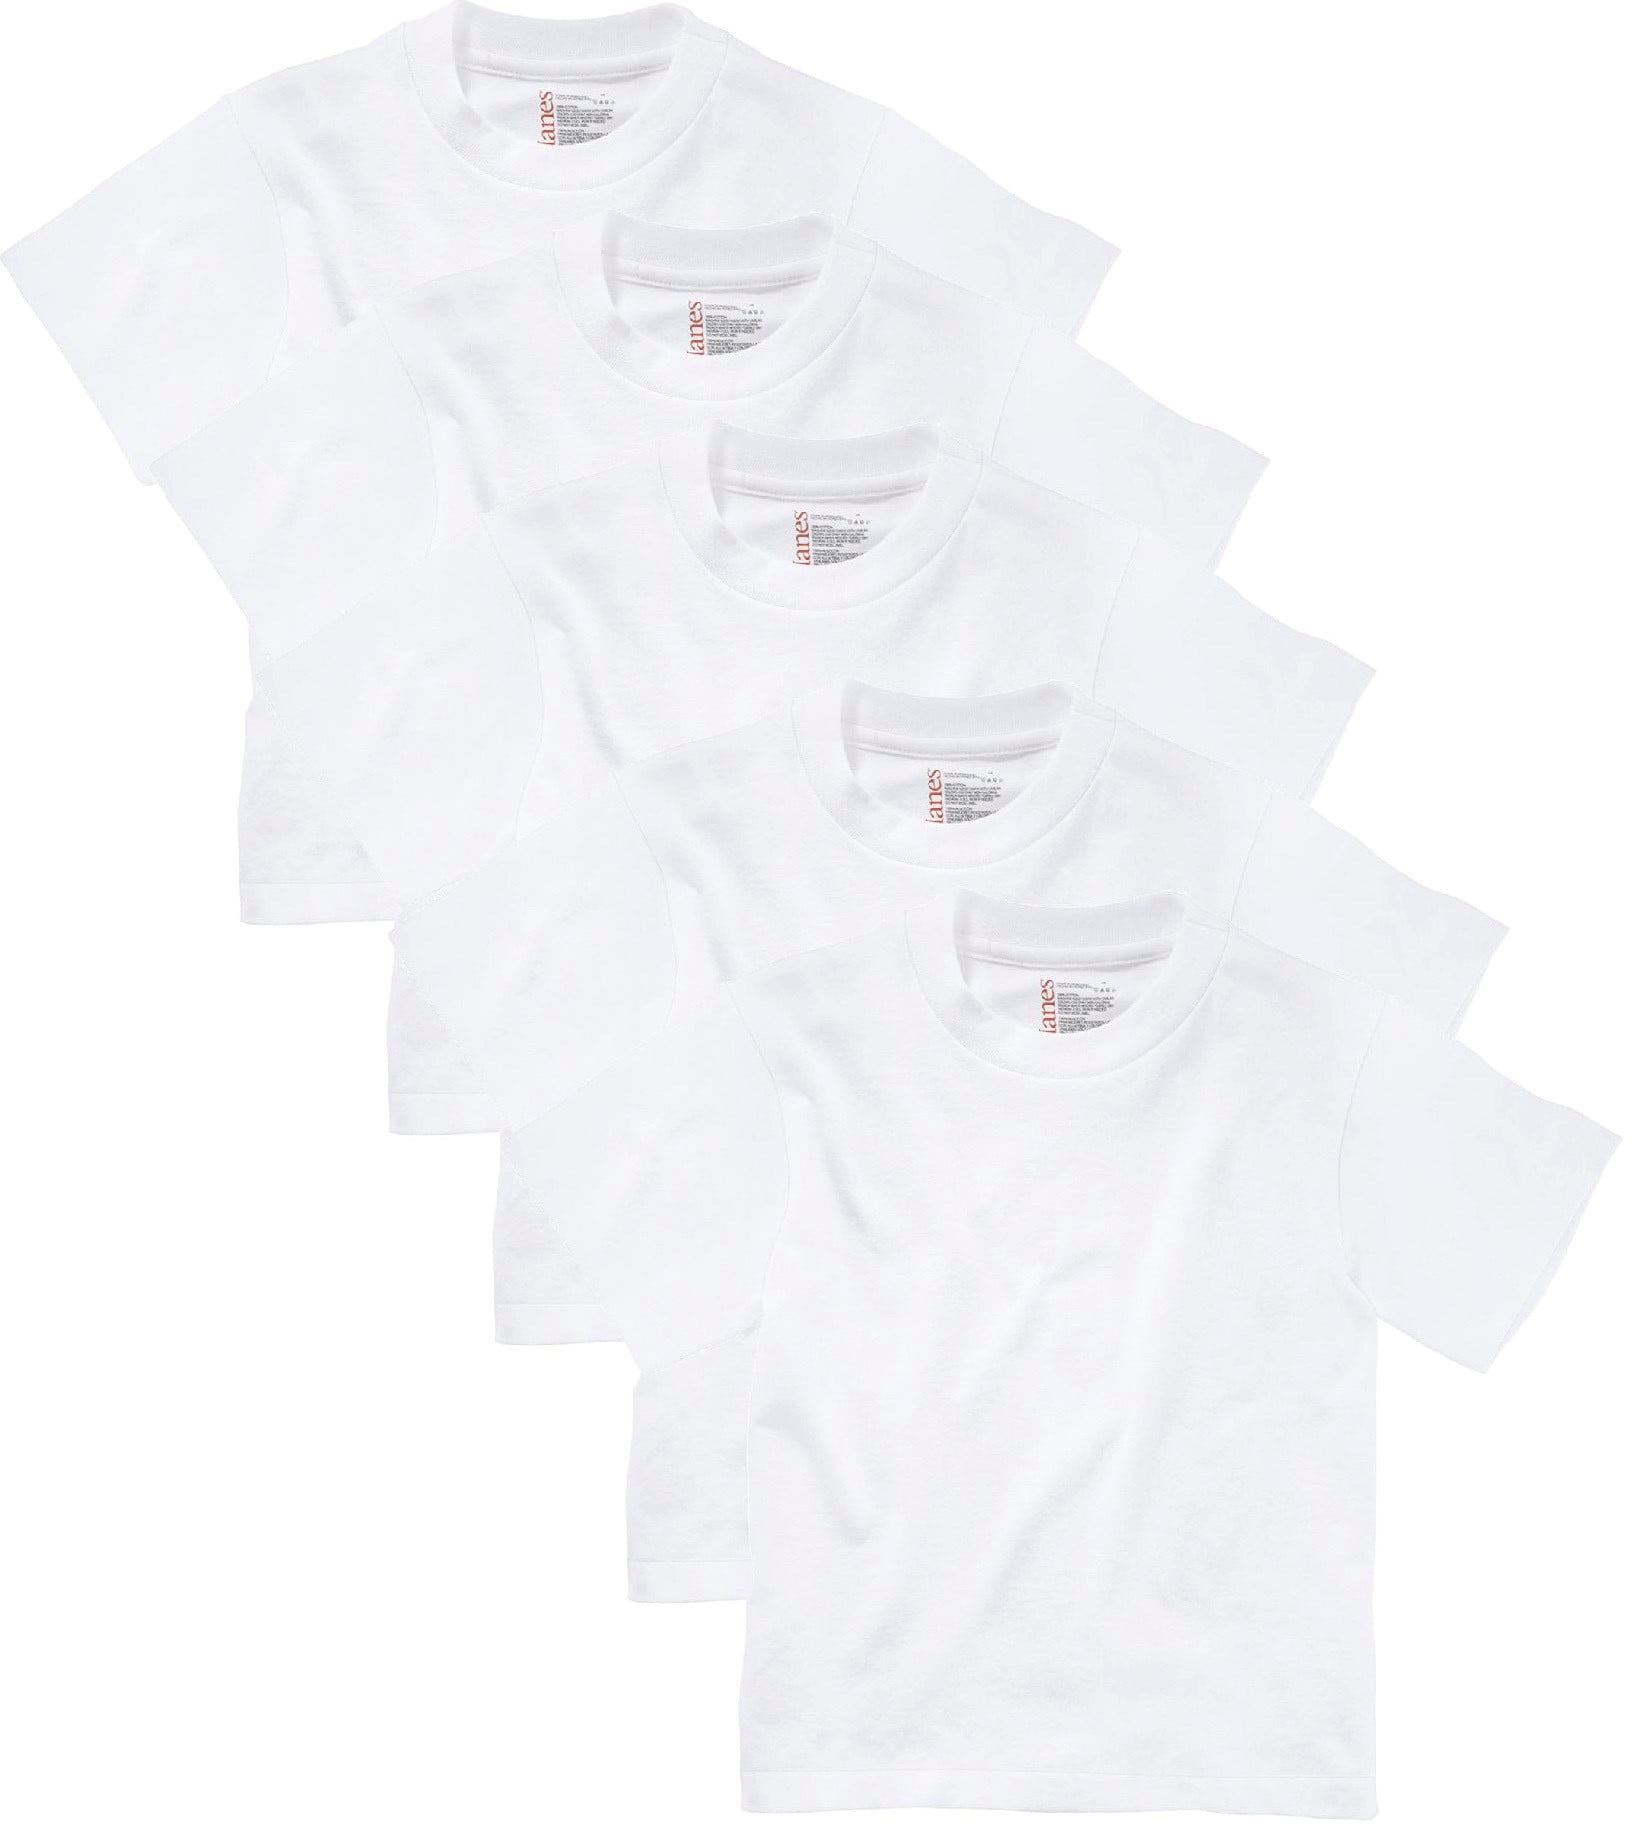 hanes t shirts for toddlers